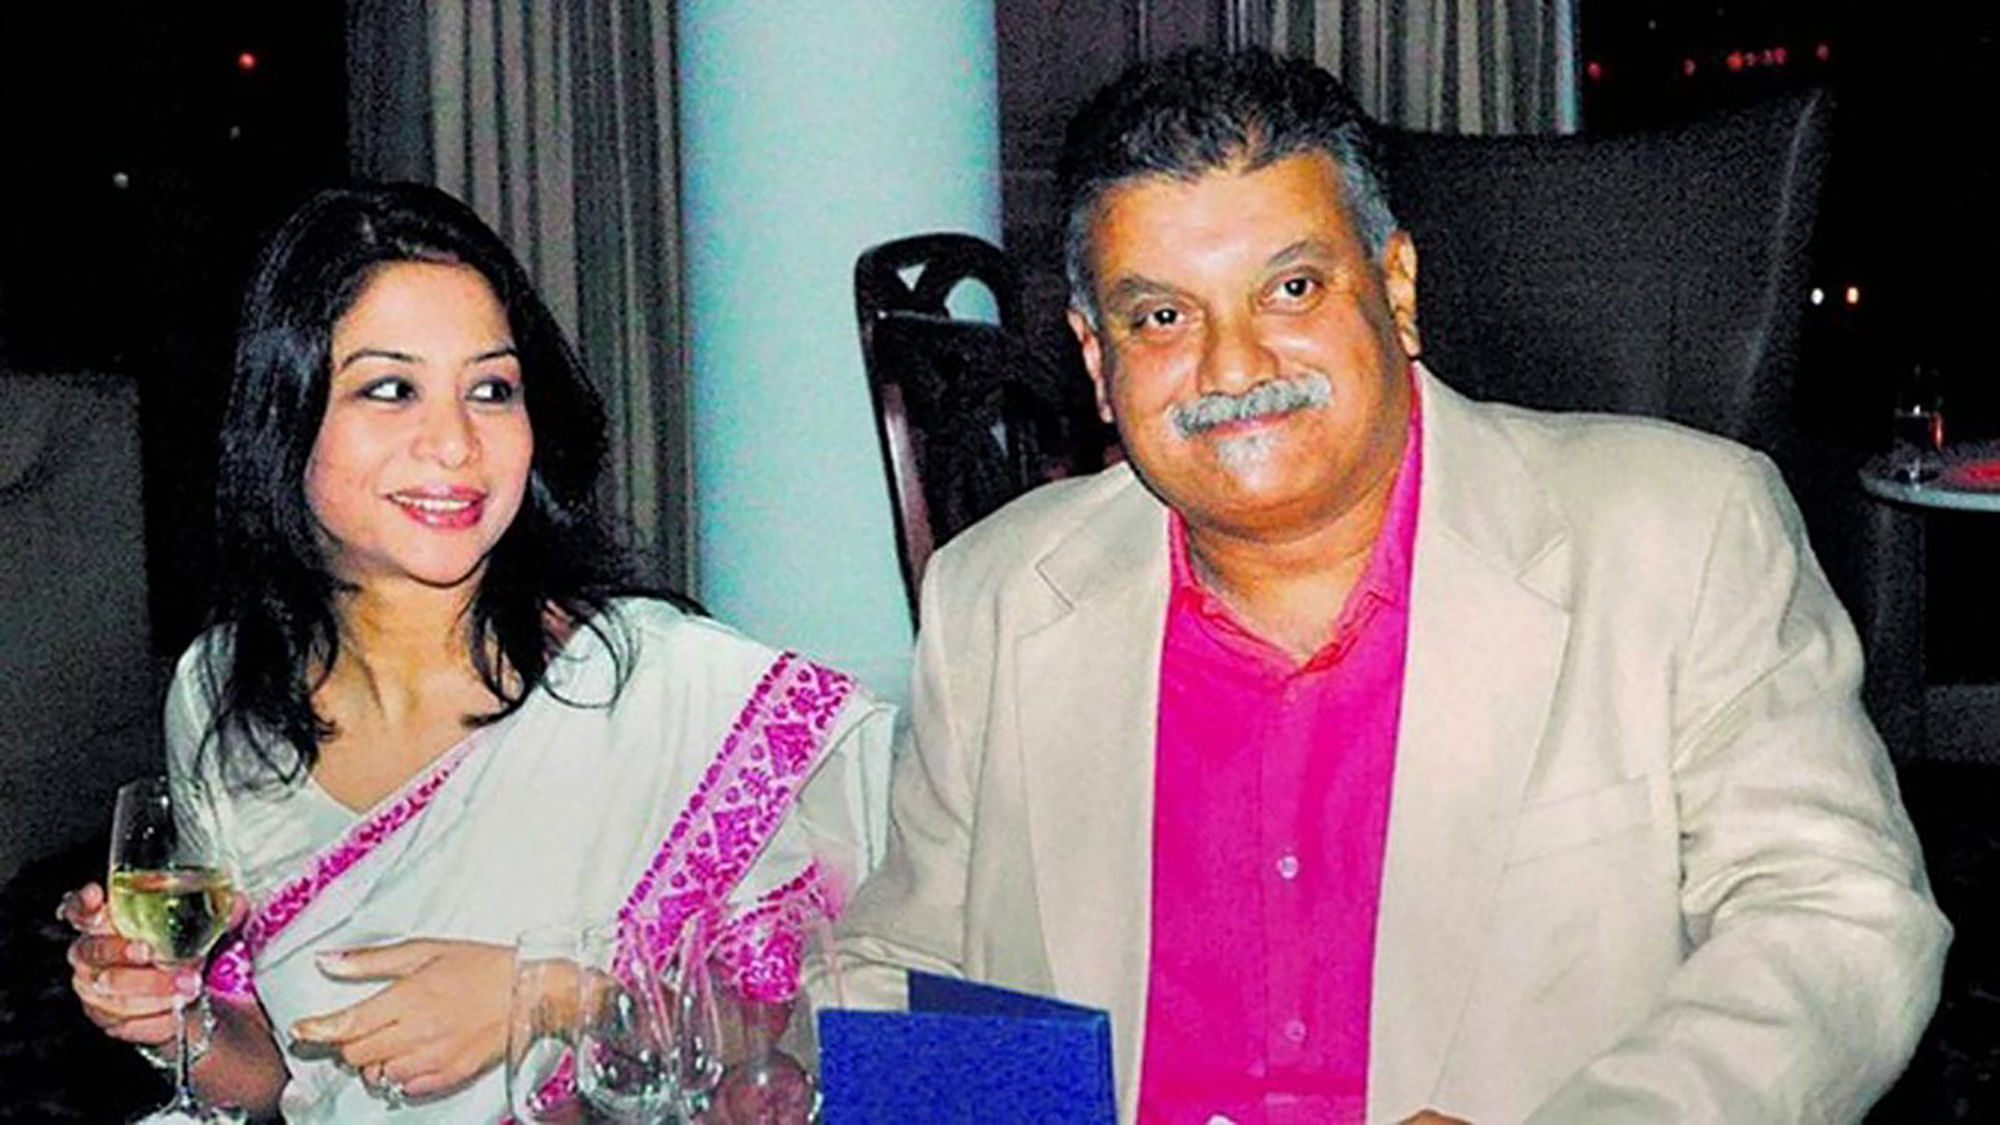 The ED grilled Indrani Mukerjea in prison over alleged money laundering.